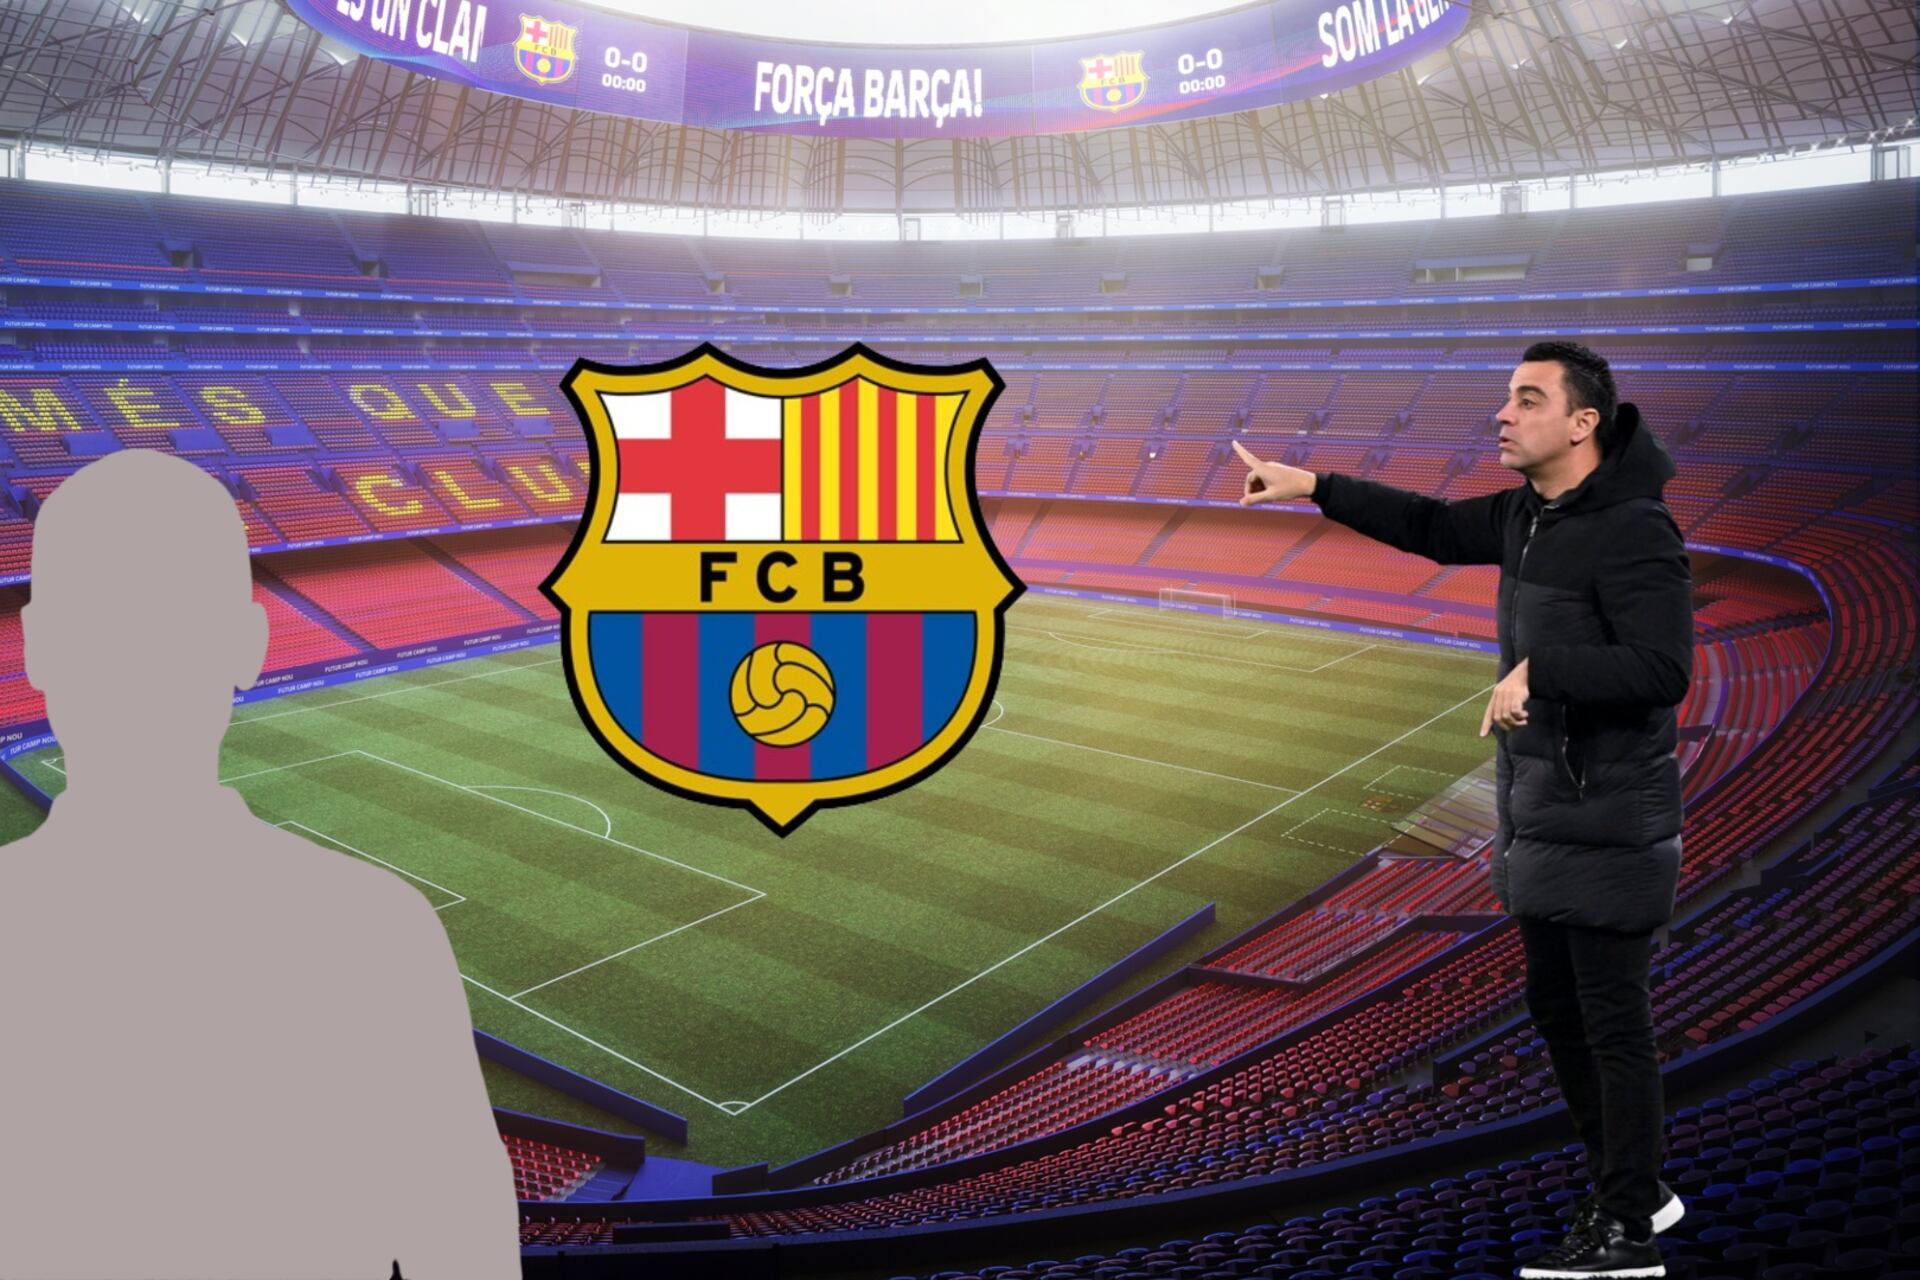 The worst decision from FC Barcelona, he hasn't debuted as a coach yet and Barca wants him as a replacement for Xavi